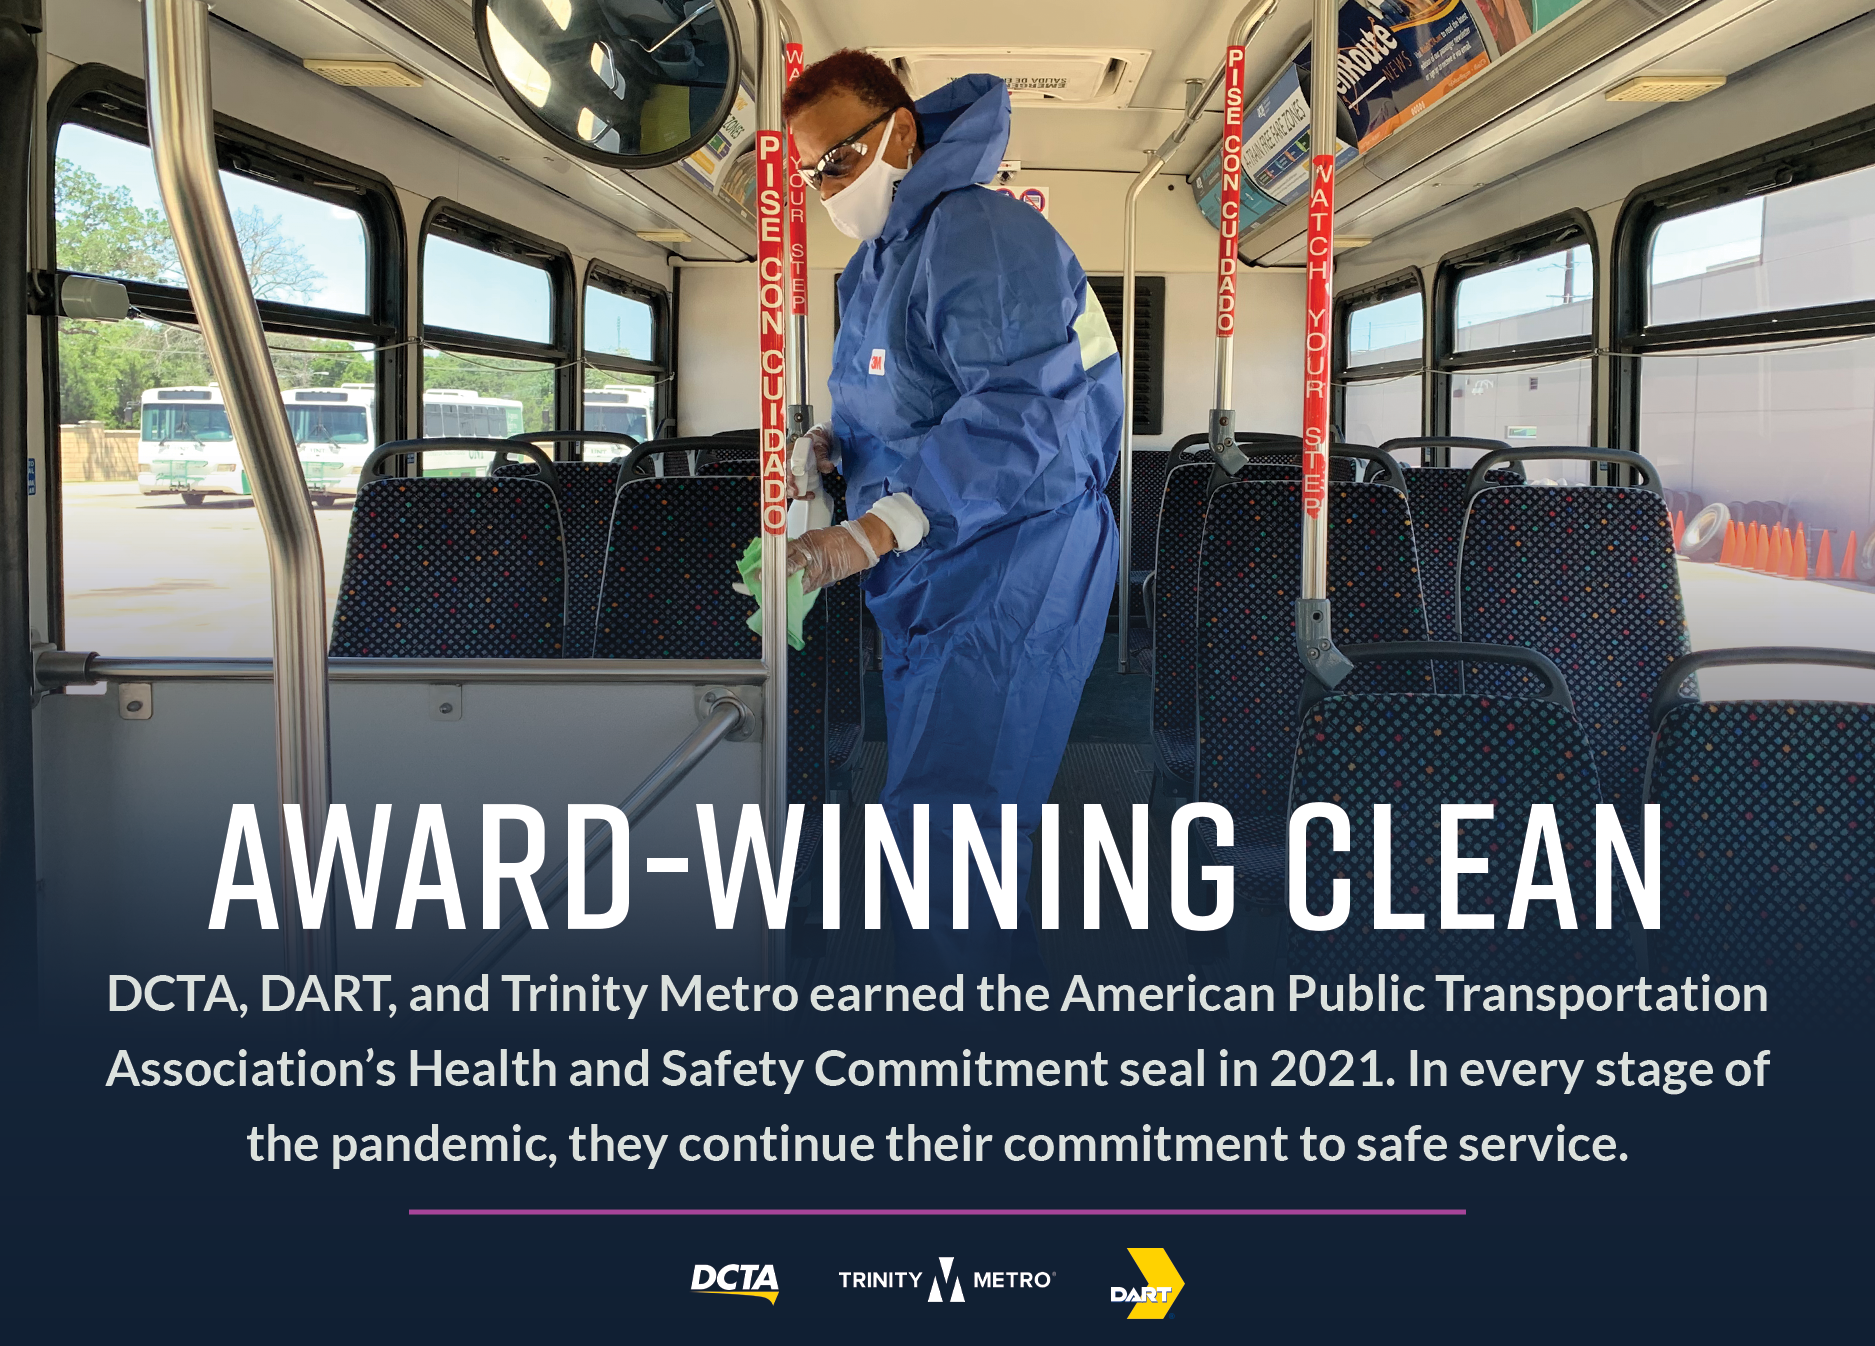 Man cleaning bus in safety suit "Award-Winning Clean"